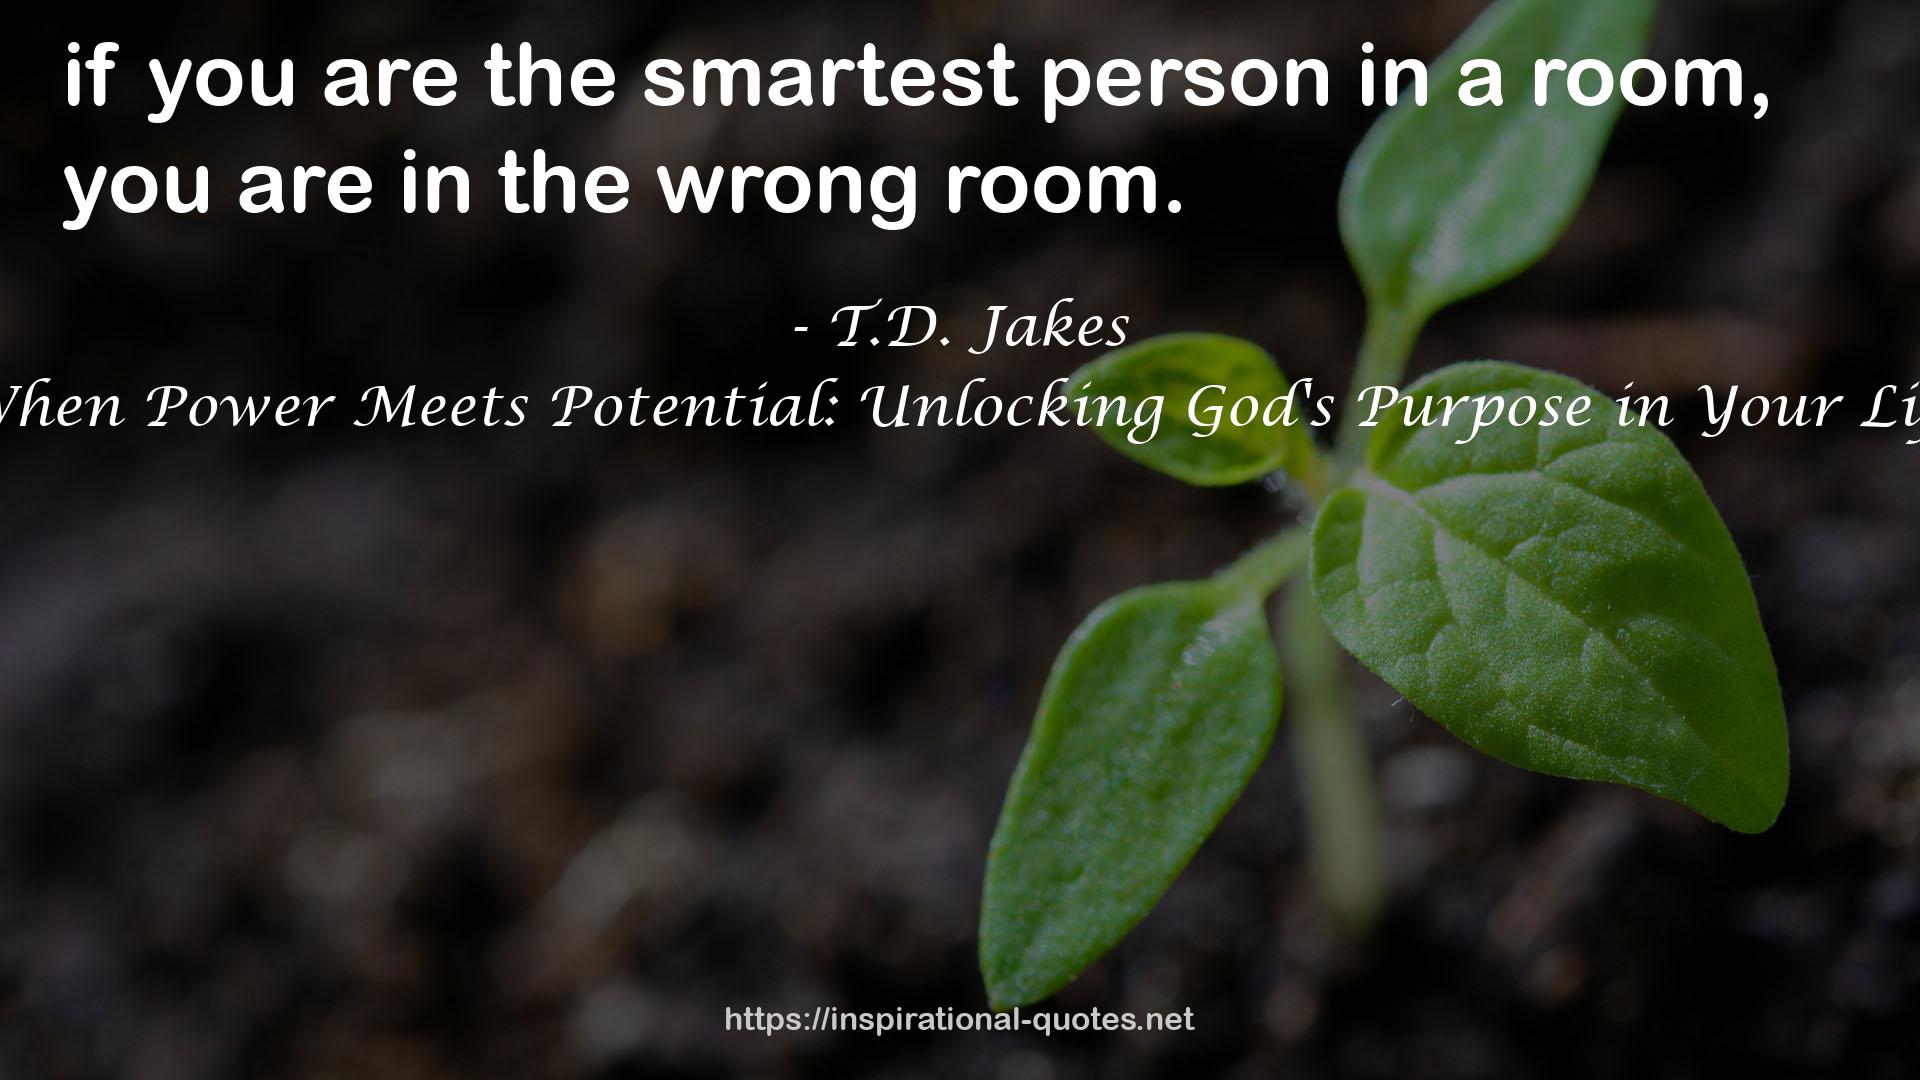 When Power Meets Potential: Unlocking God's Purpose in Your Life QUOTES